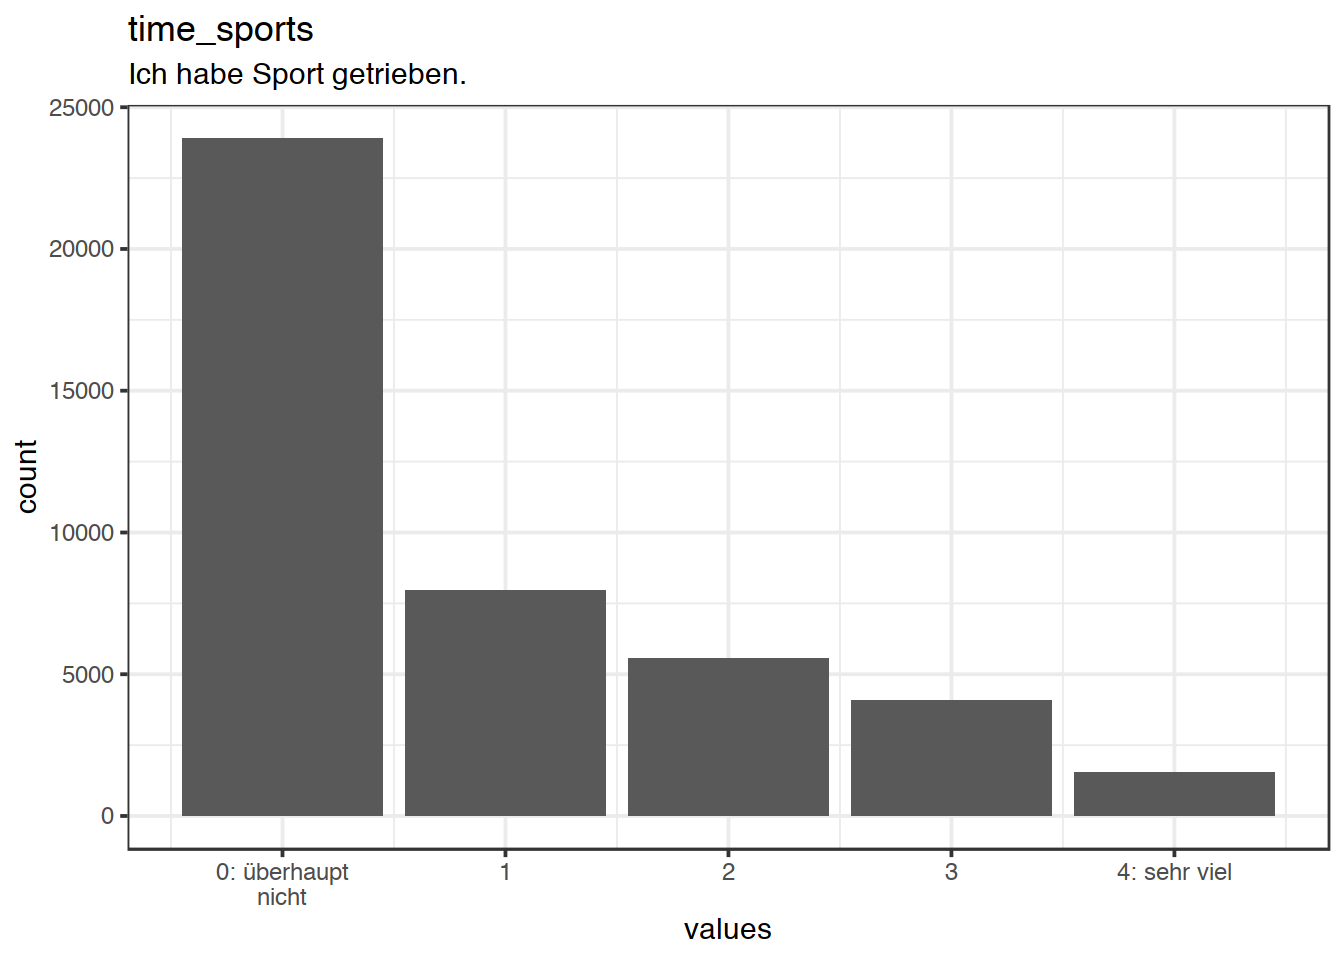 Distribution of values for time_sports